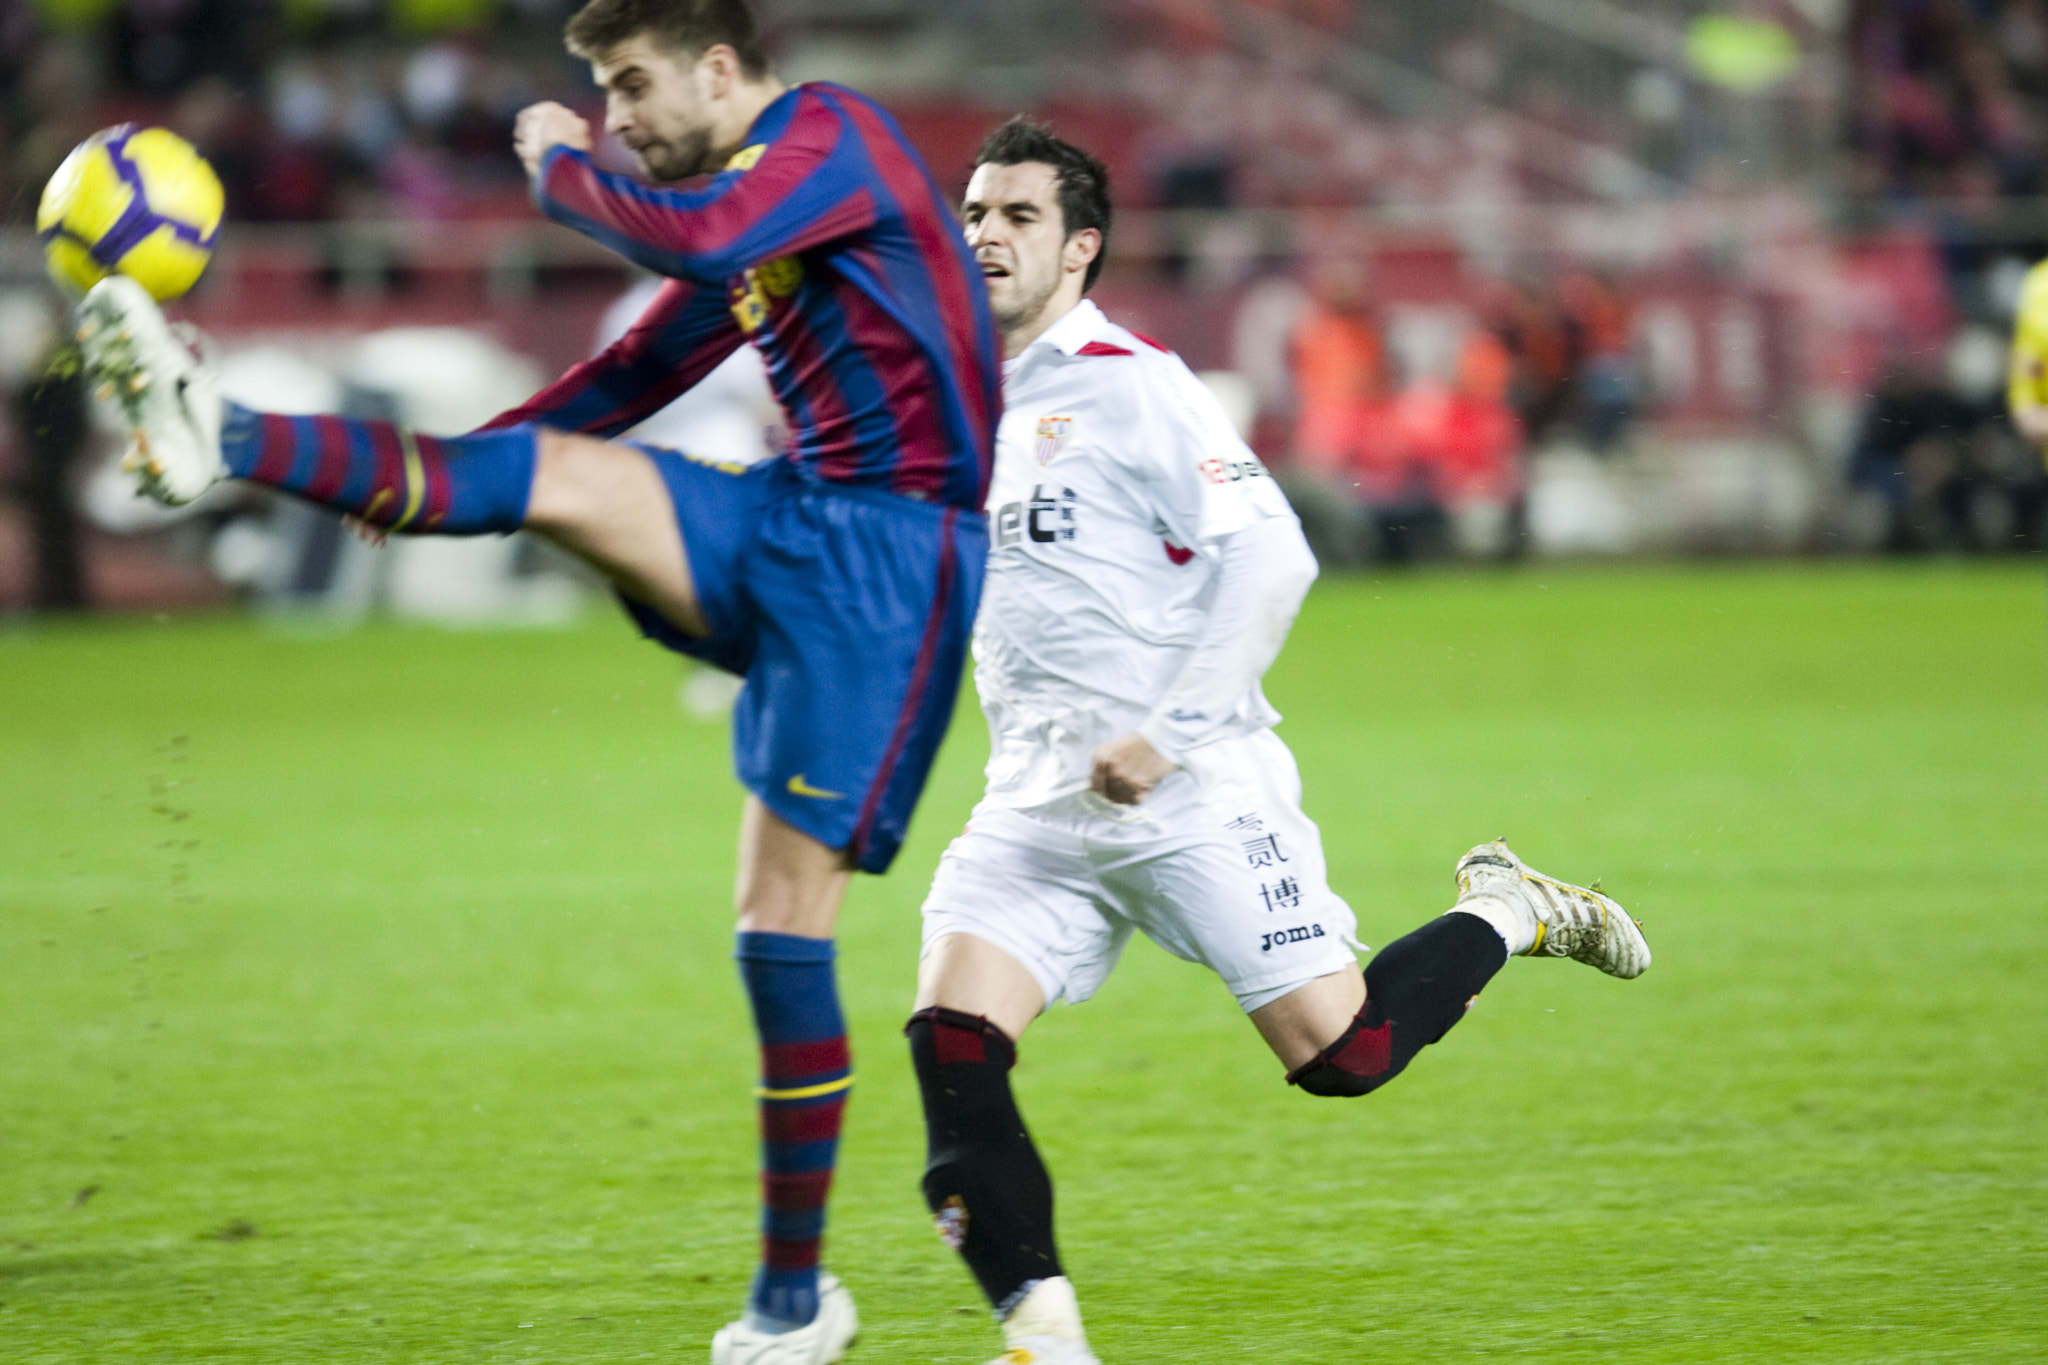 Pique kicking the ball before Negredo. Spanish Cup game between Sevilla FC and FC Barcelona, Ramon S